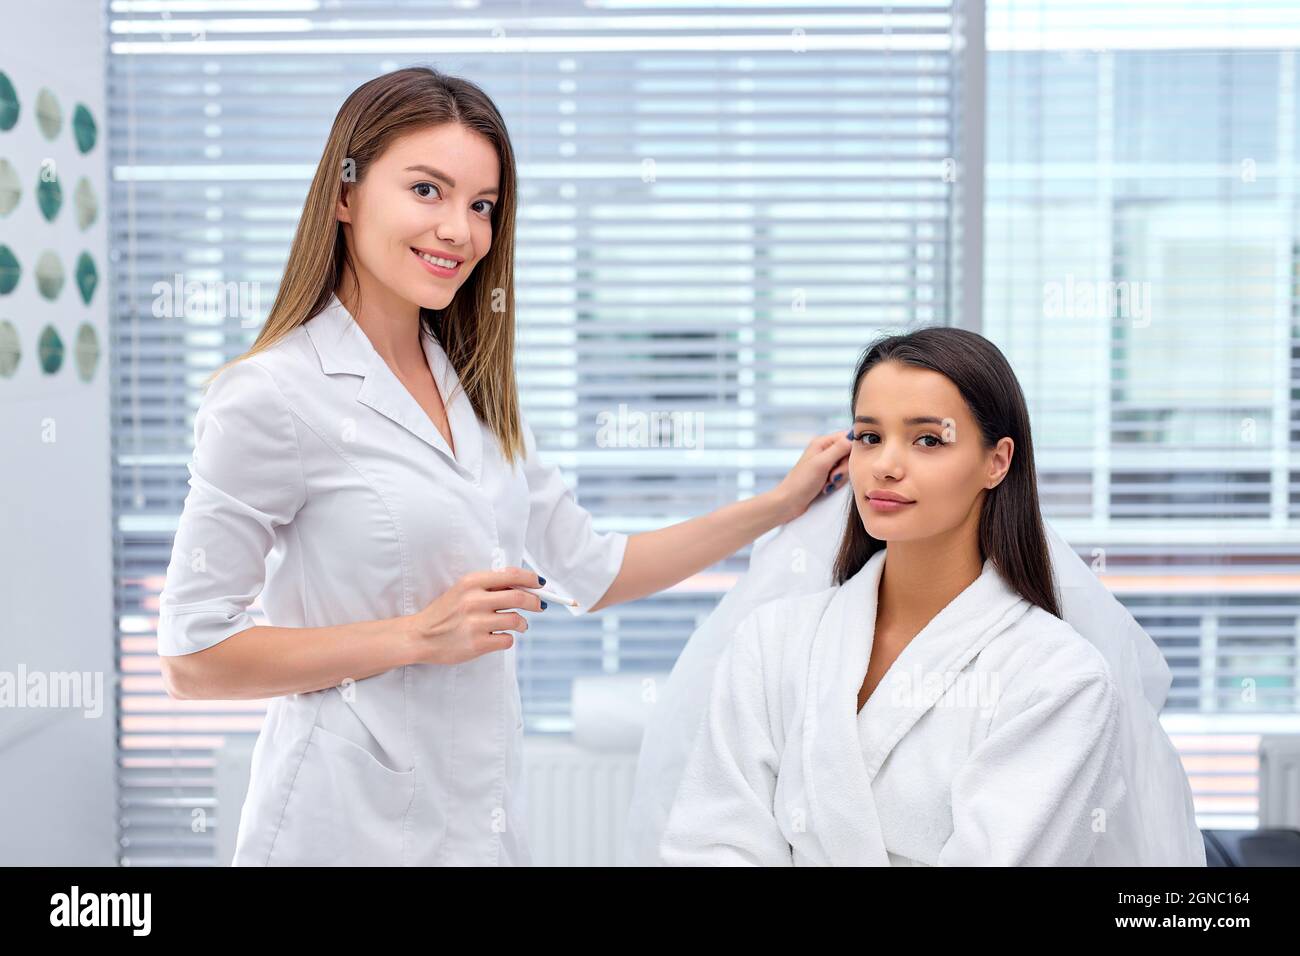 healthcare, medical and surgery concept. cosmetologist or doctor with patient, preparing to do injection, Thread Lifting, PDO thread. Aesthetic beauty Stock Photo